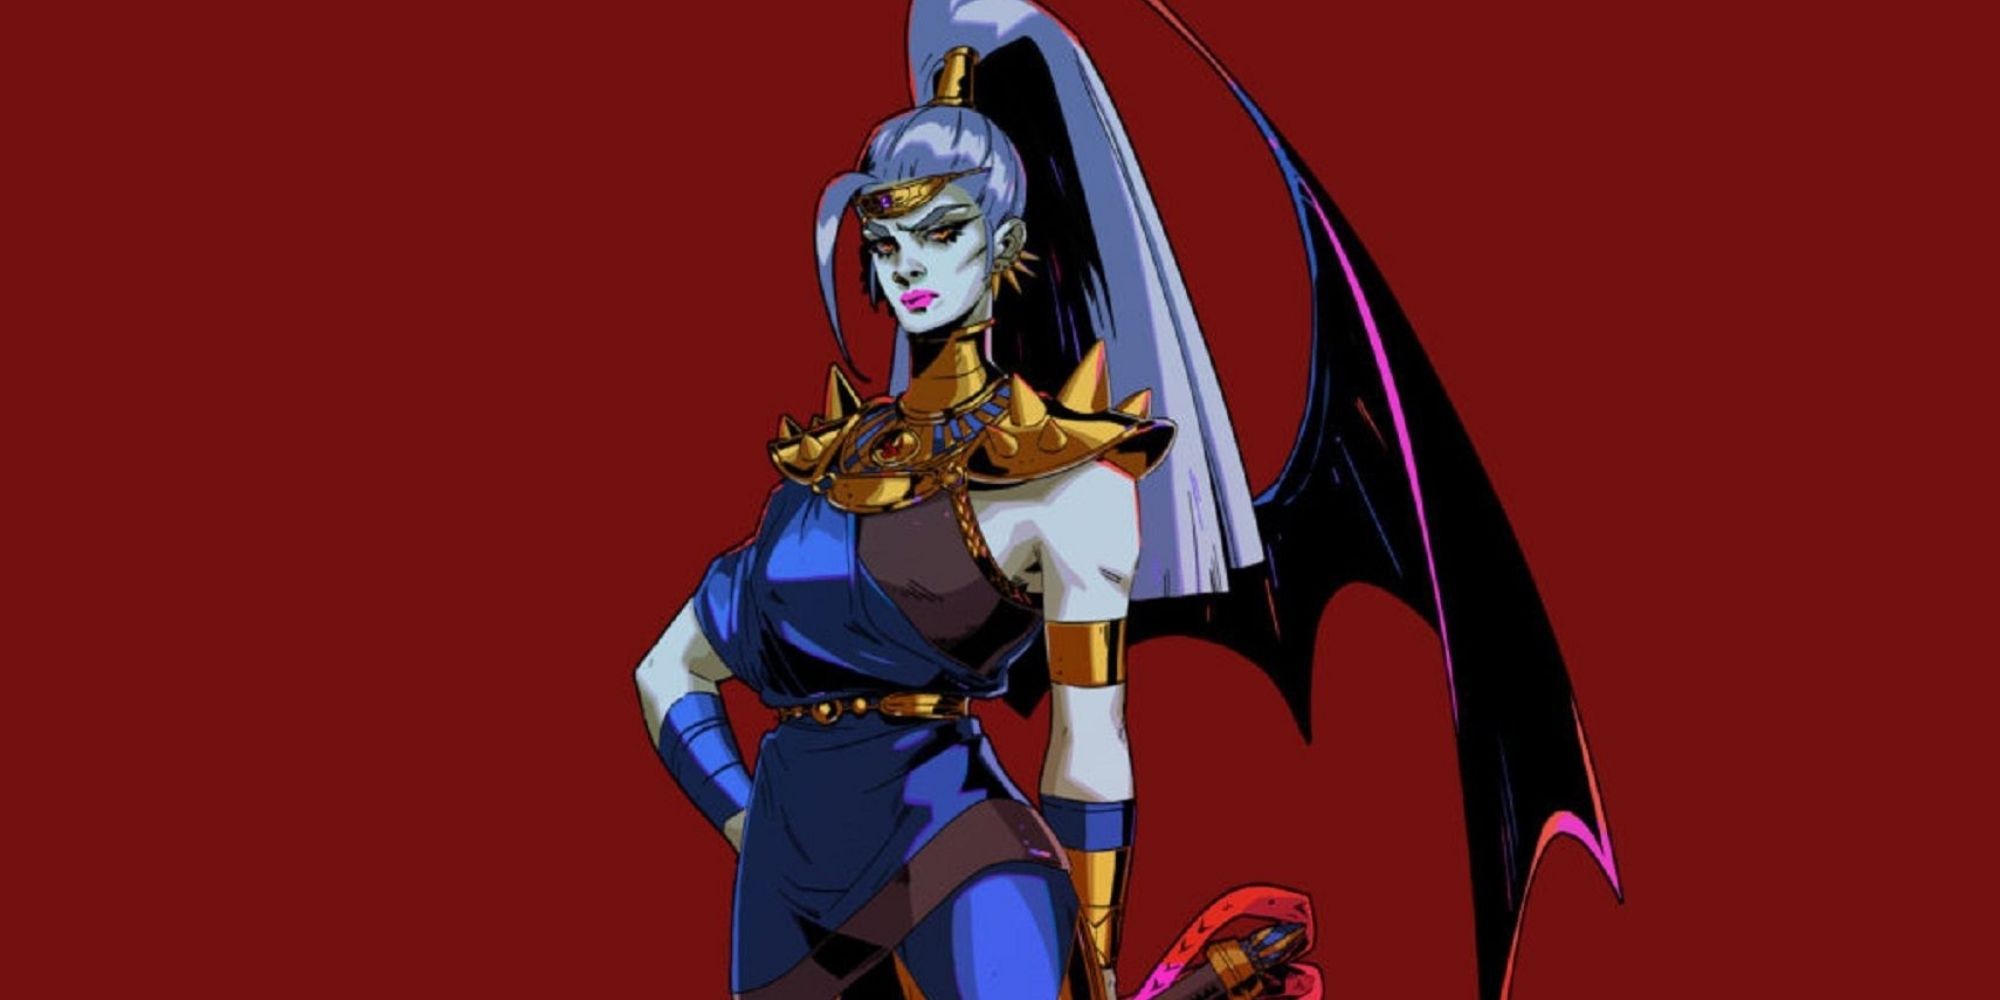 Hades Megaera posing in front of red background